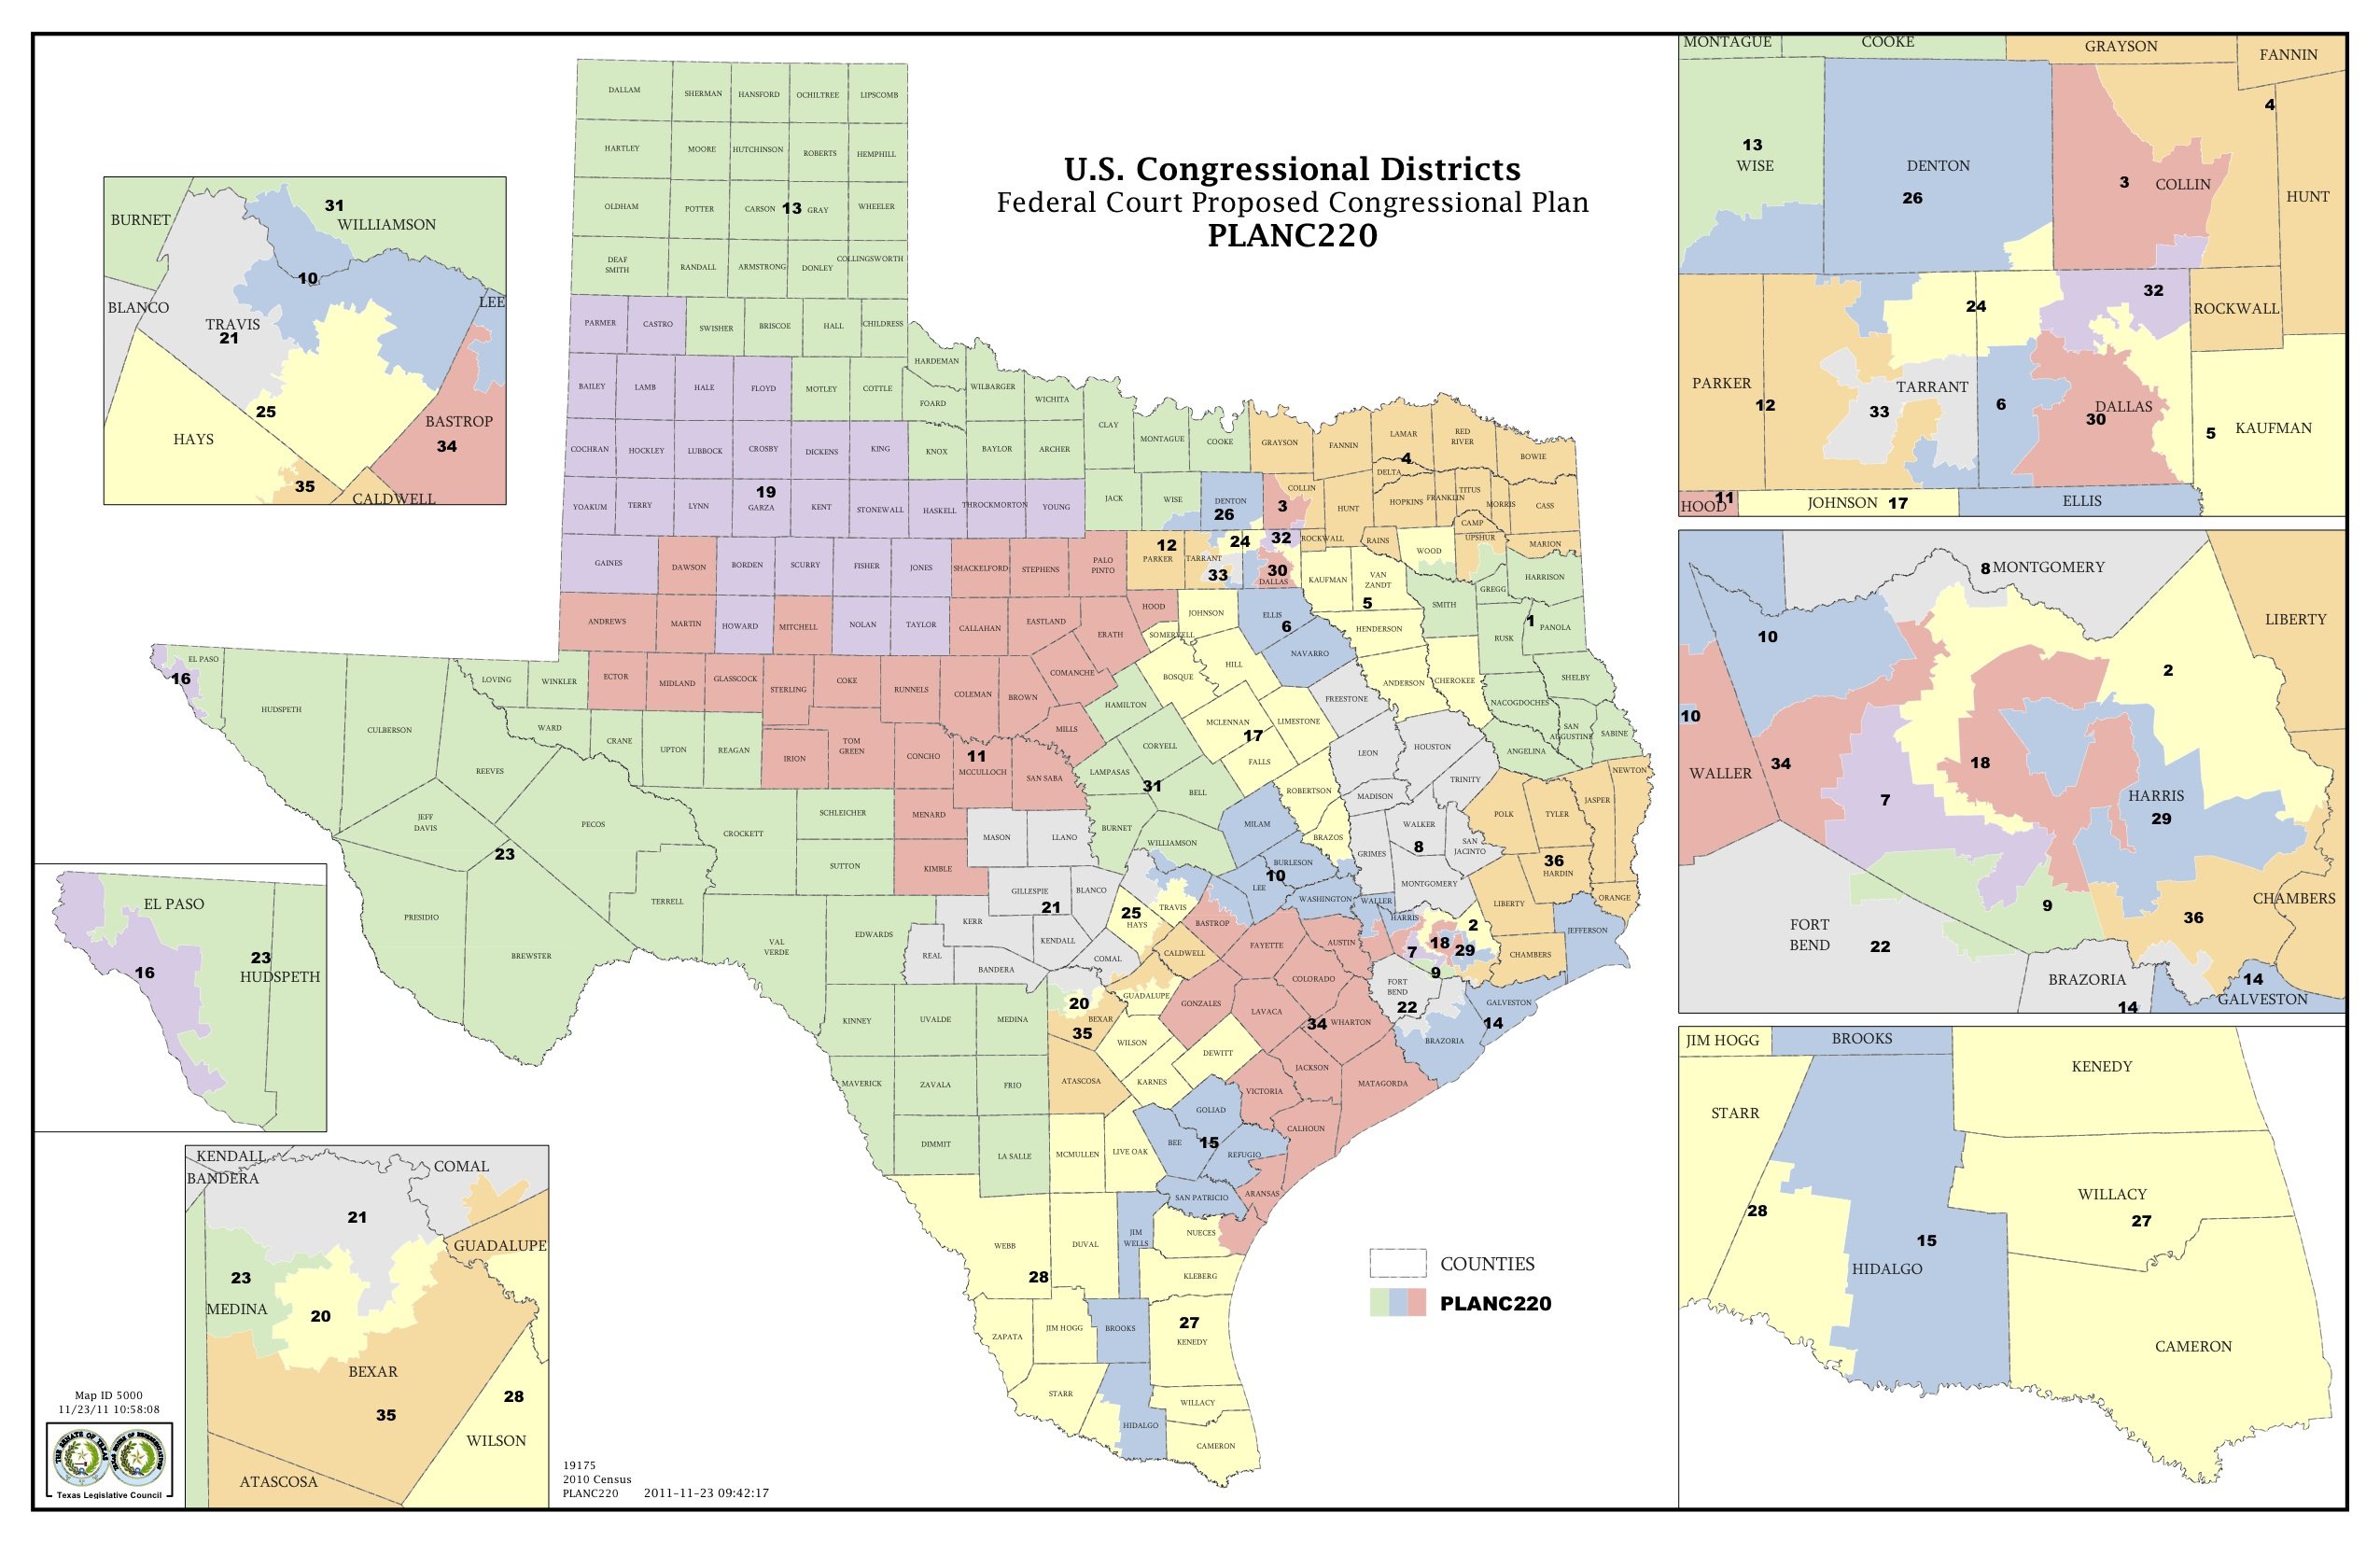 Map Of Texas Congressional Districts | Business Ideas 2013 - Texas Congressional District Map